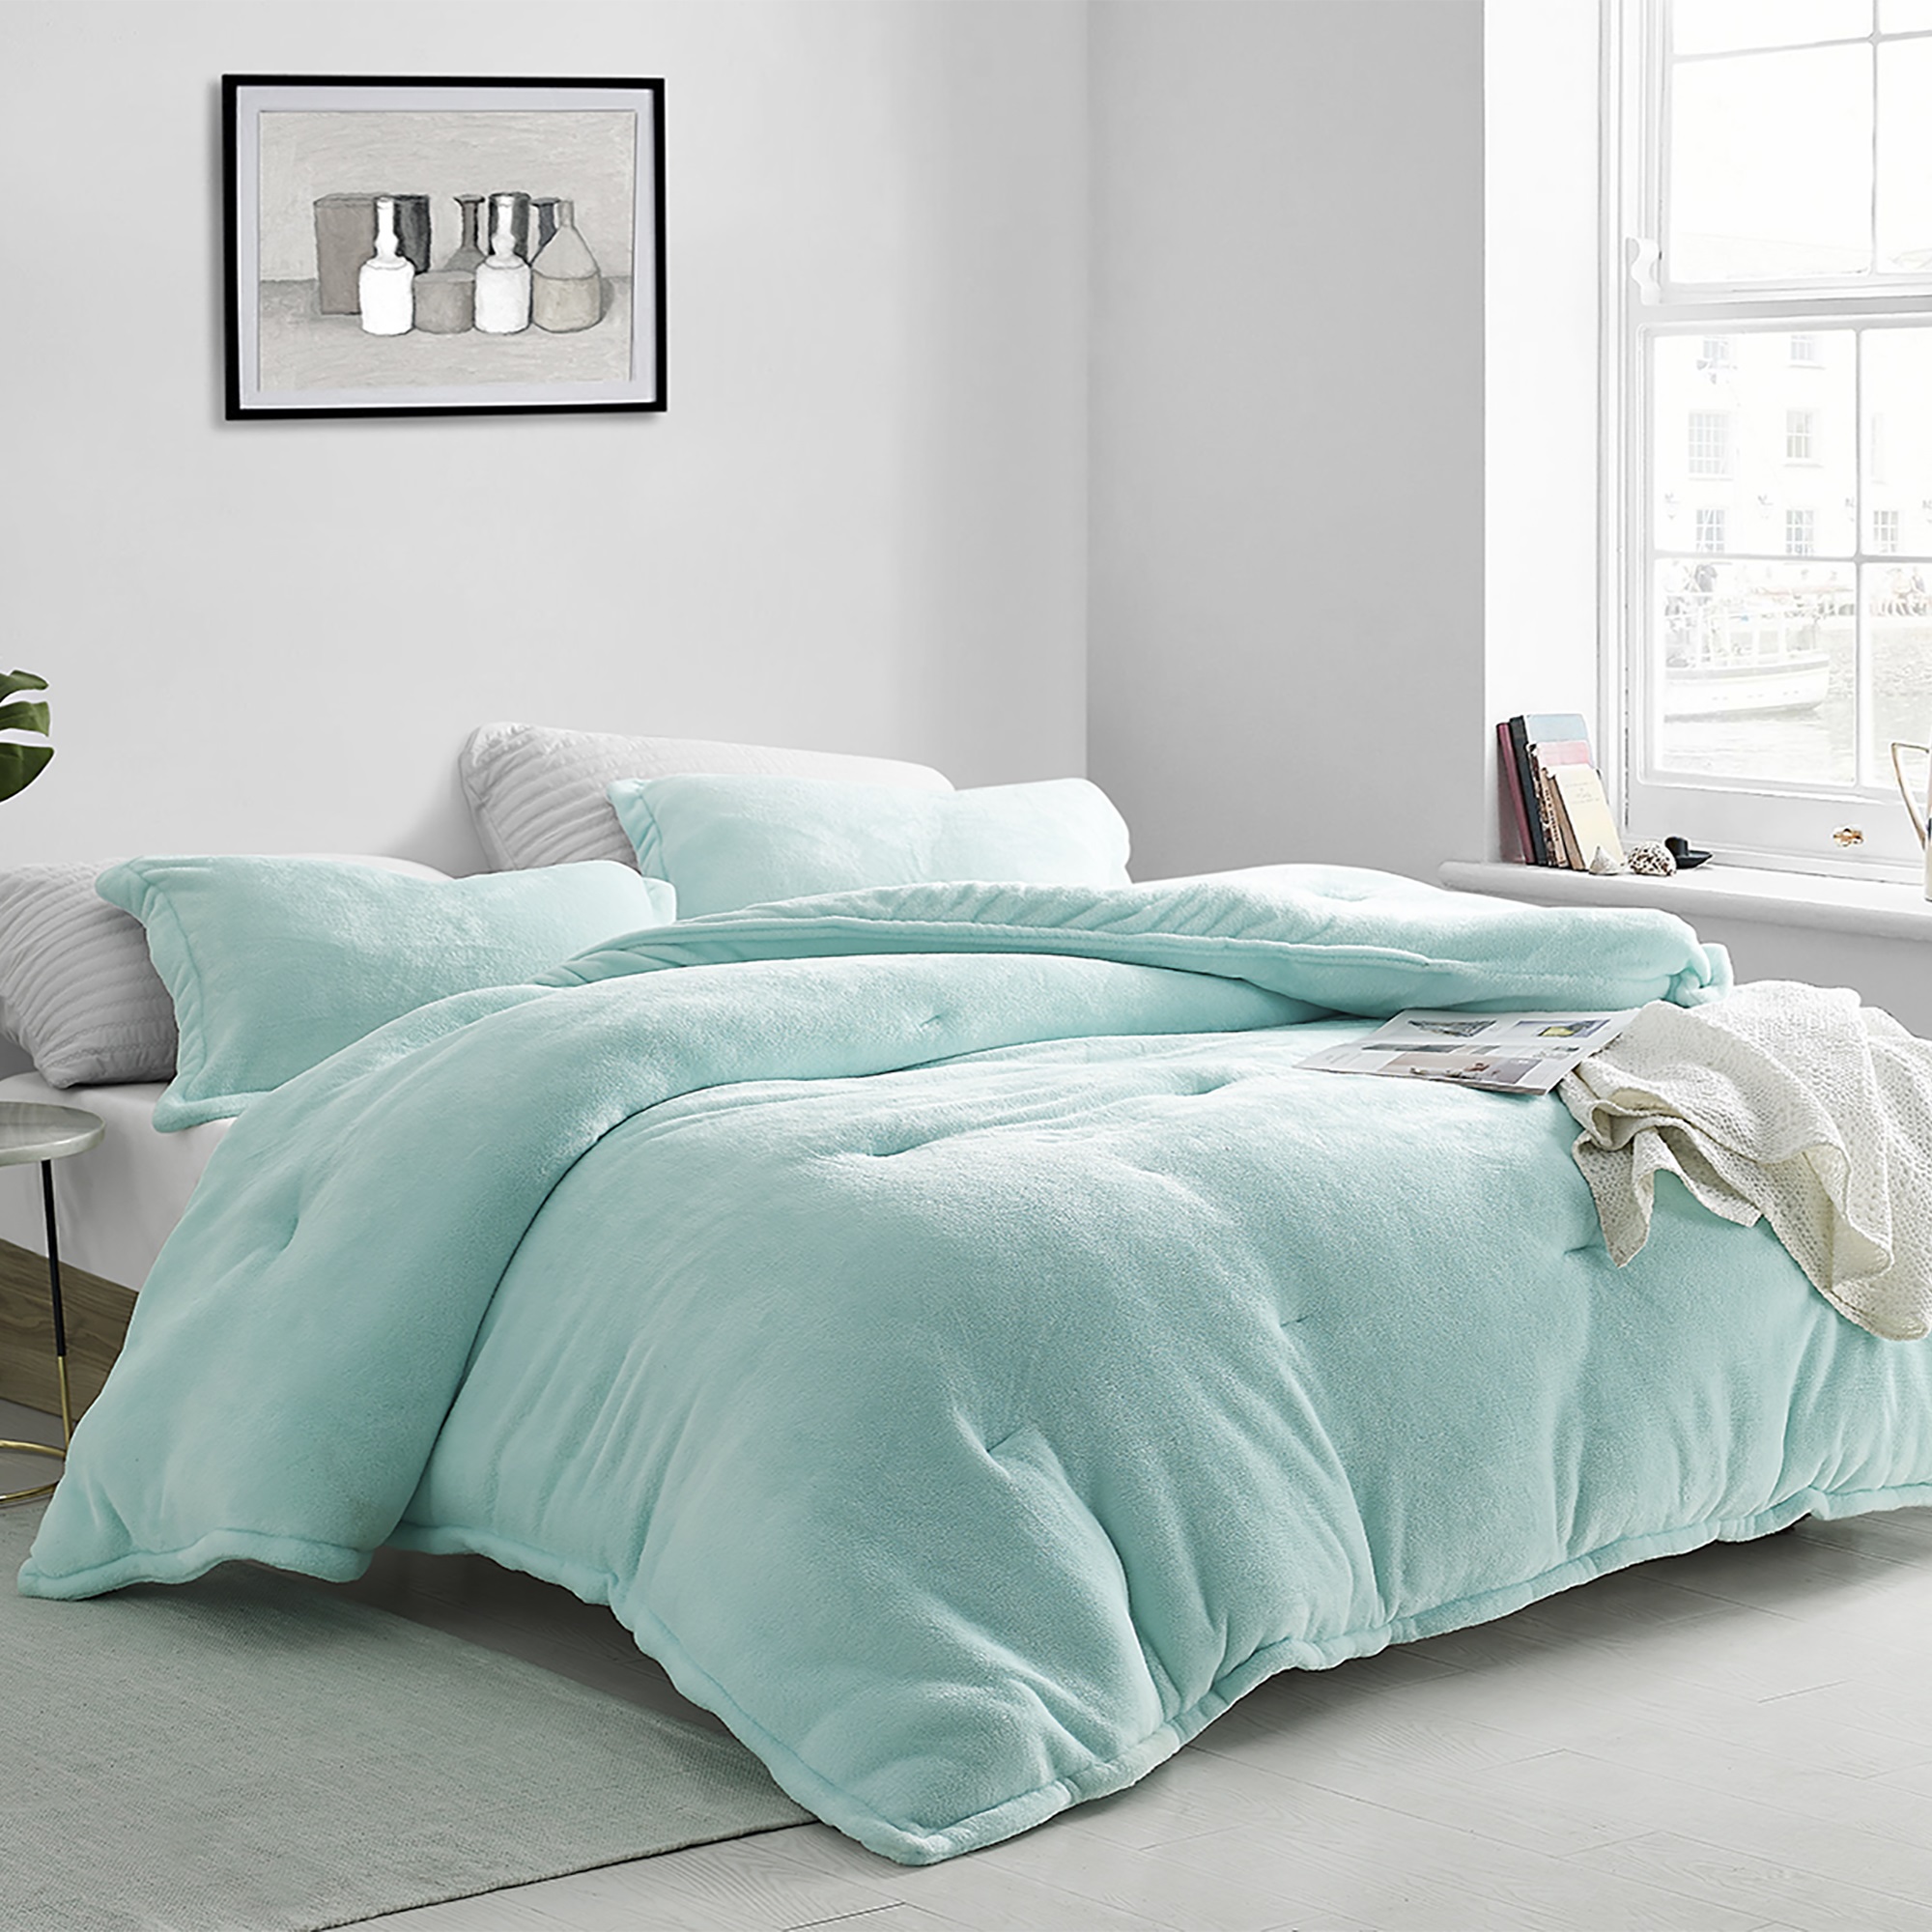 Coma Inducer Oversized Comforter - Touchy Feely - Aruba